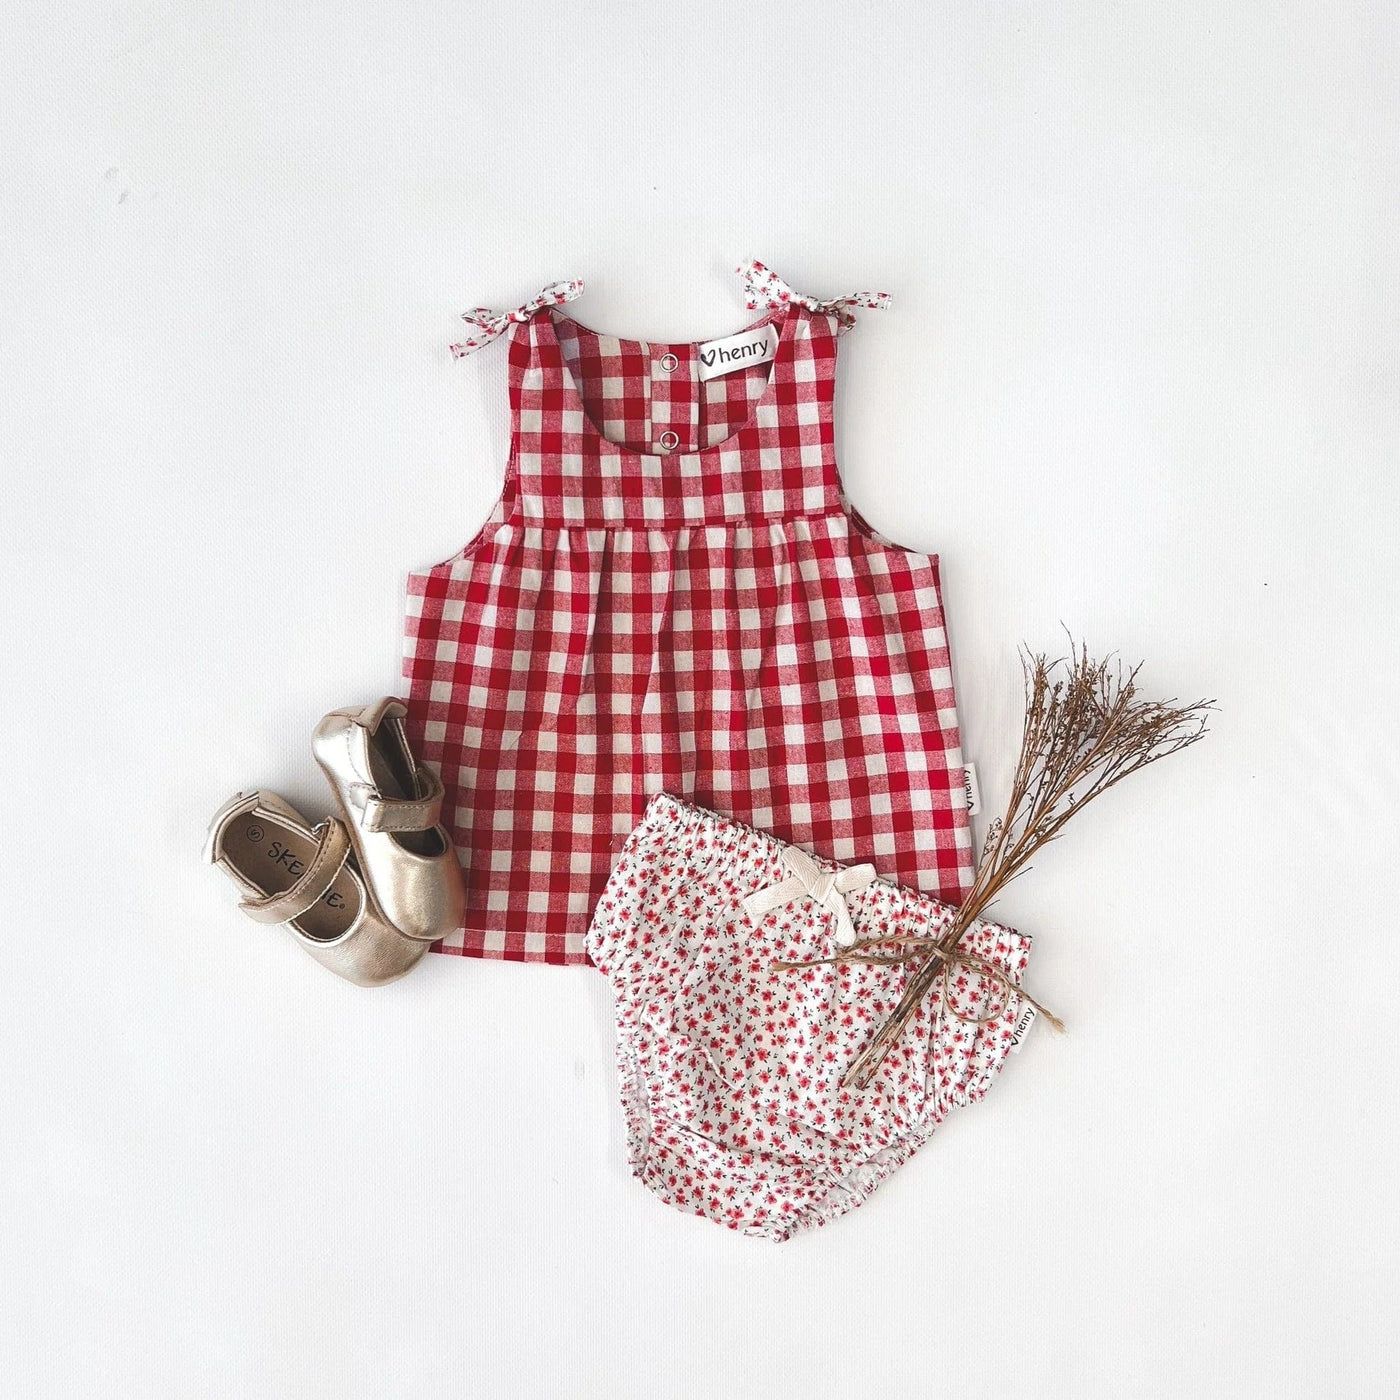 Love Henry Baby Amelia Top - Red Check Short Sleeve Top Love Henry 